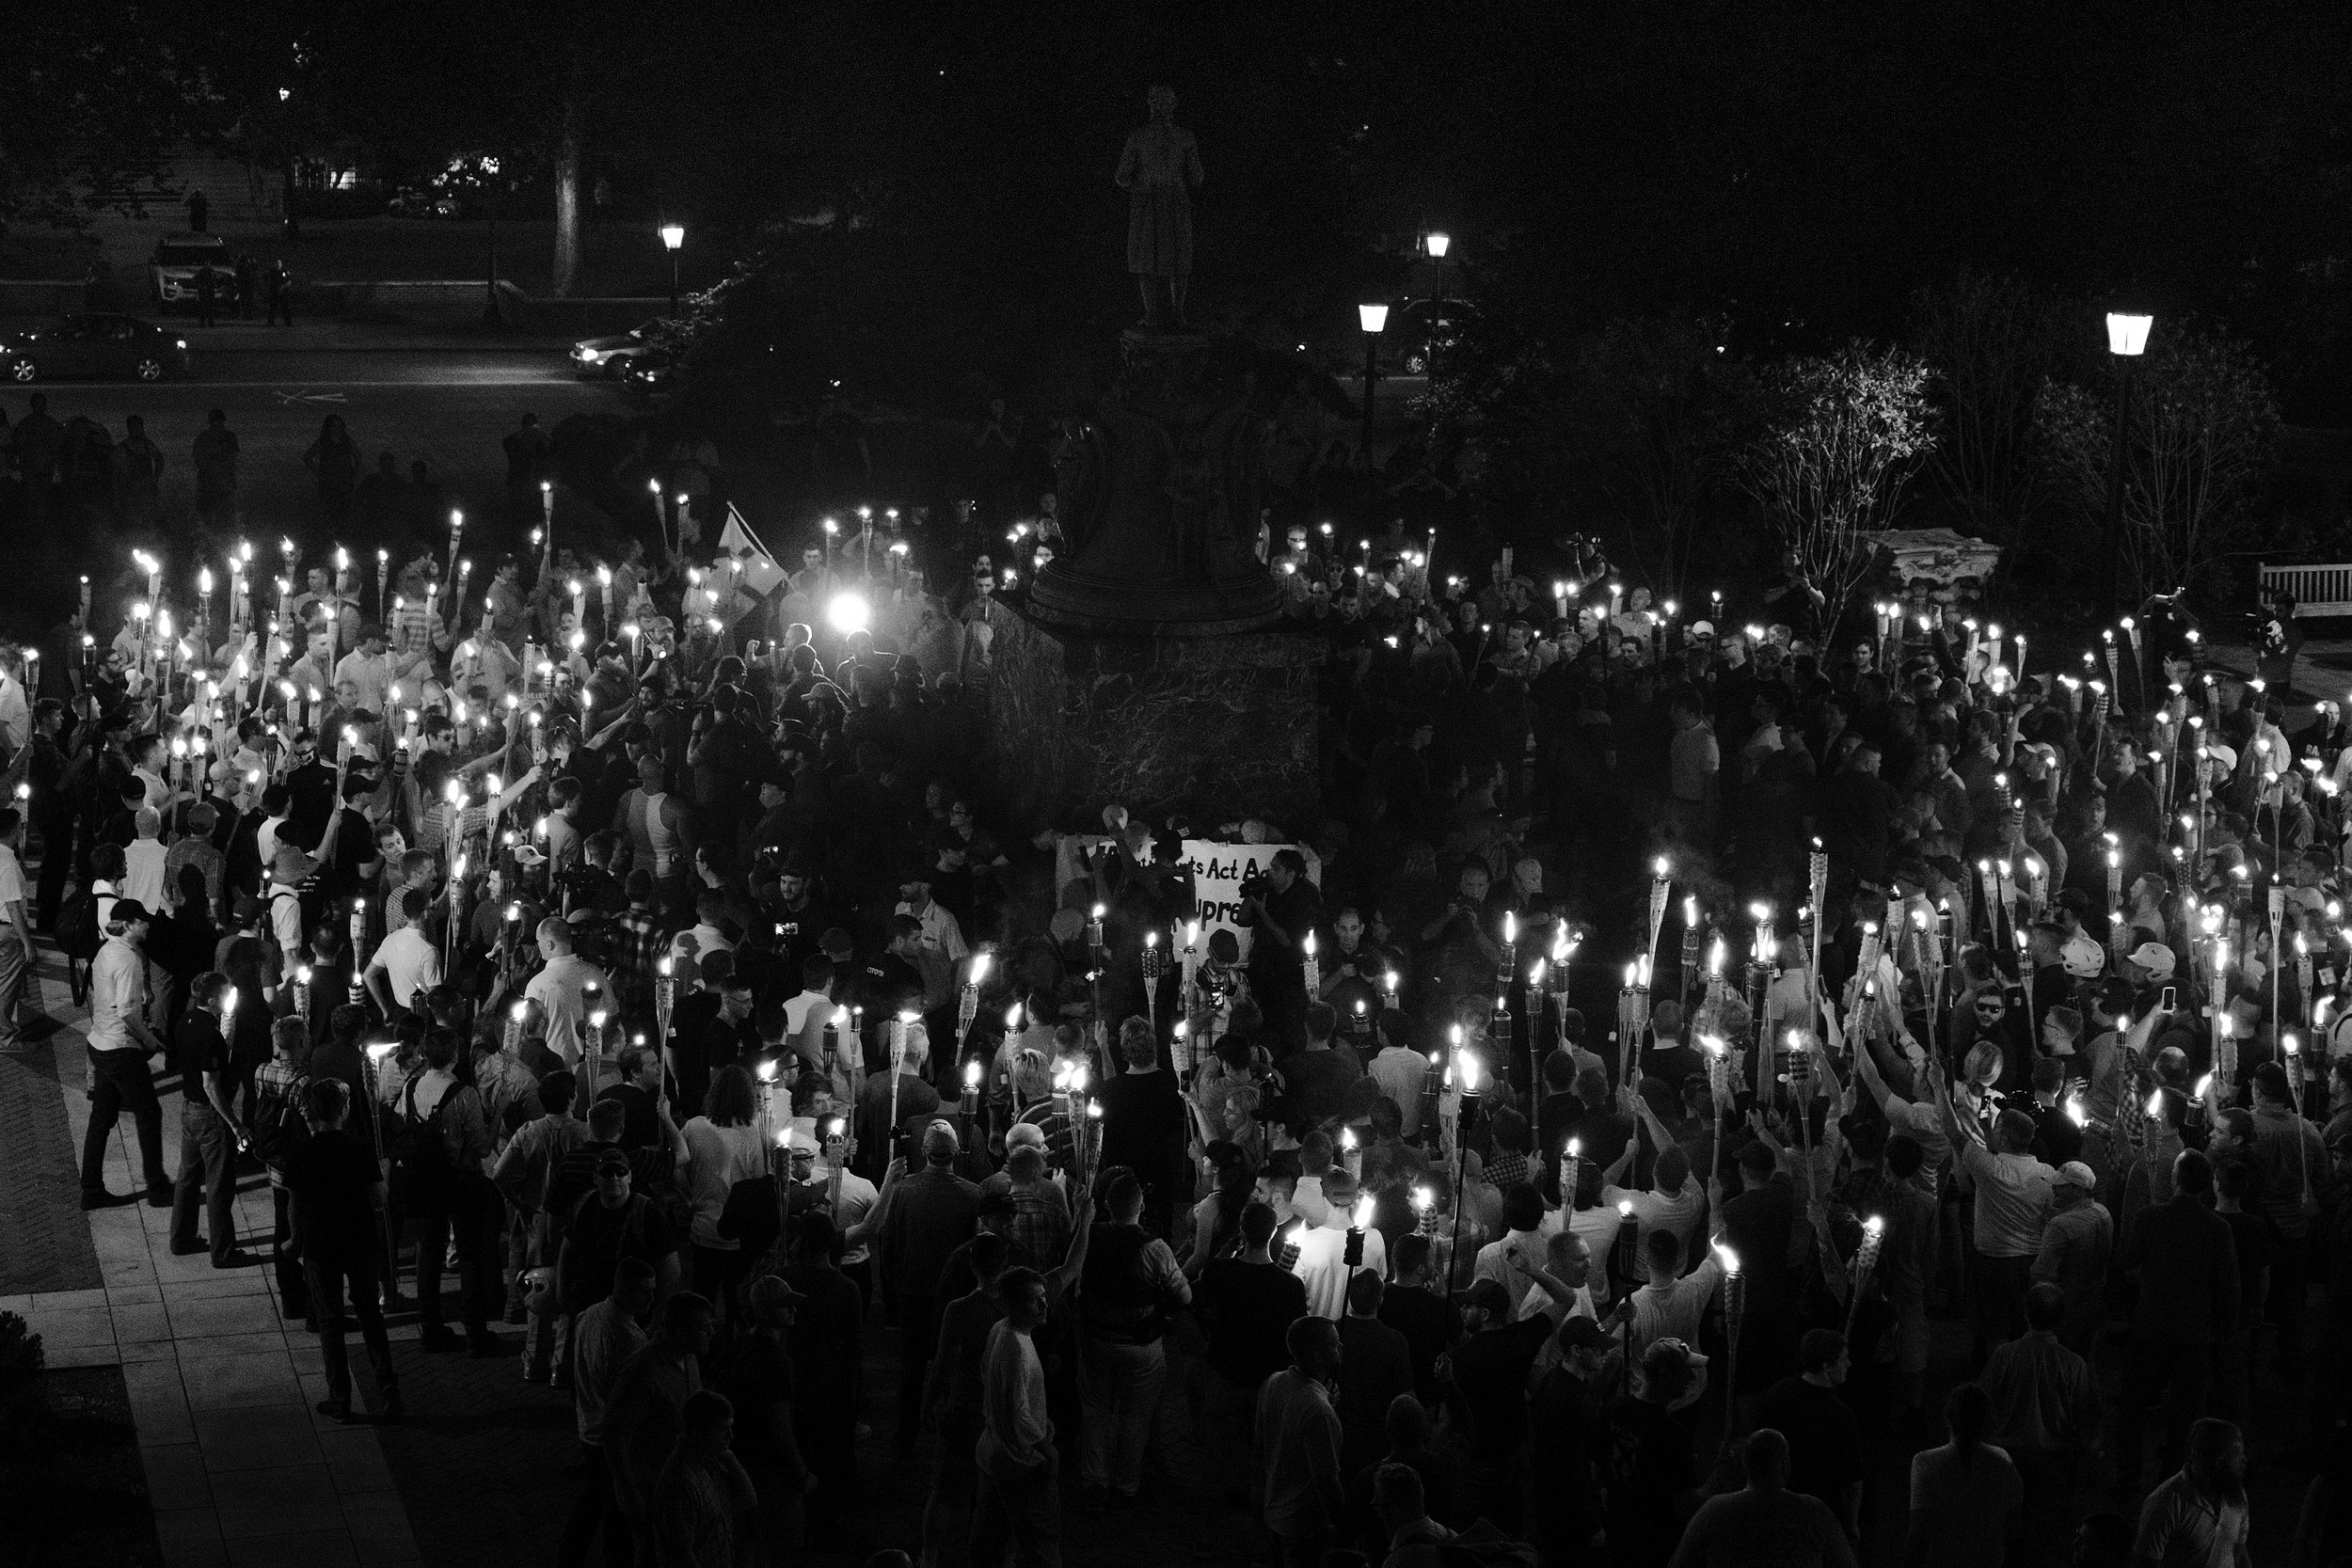  The white supremacists marched through UVA campus until they reached the Thomas Jefferson monument where they surrounded a small group of protesters -- mostly college students -- who encircled the statue protectively. As the students chanted "Black 